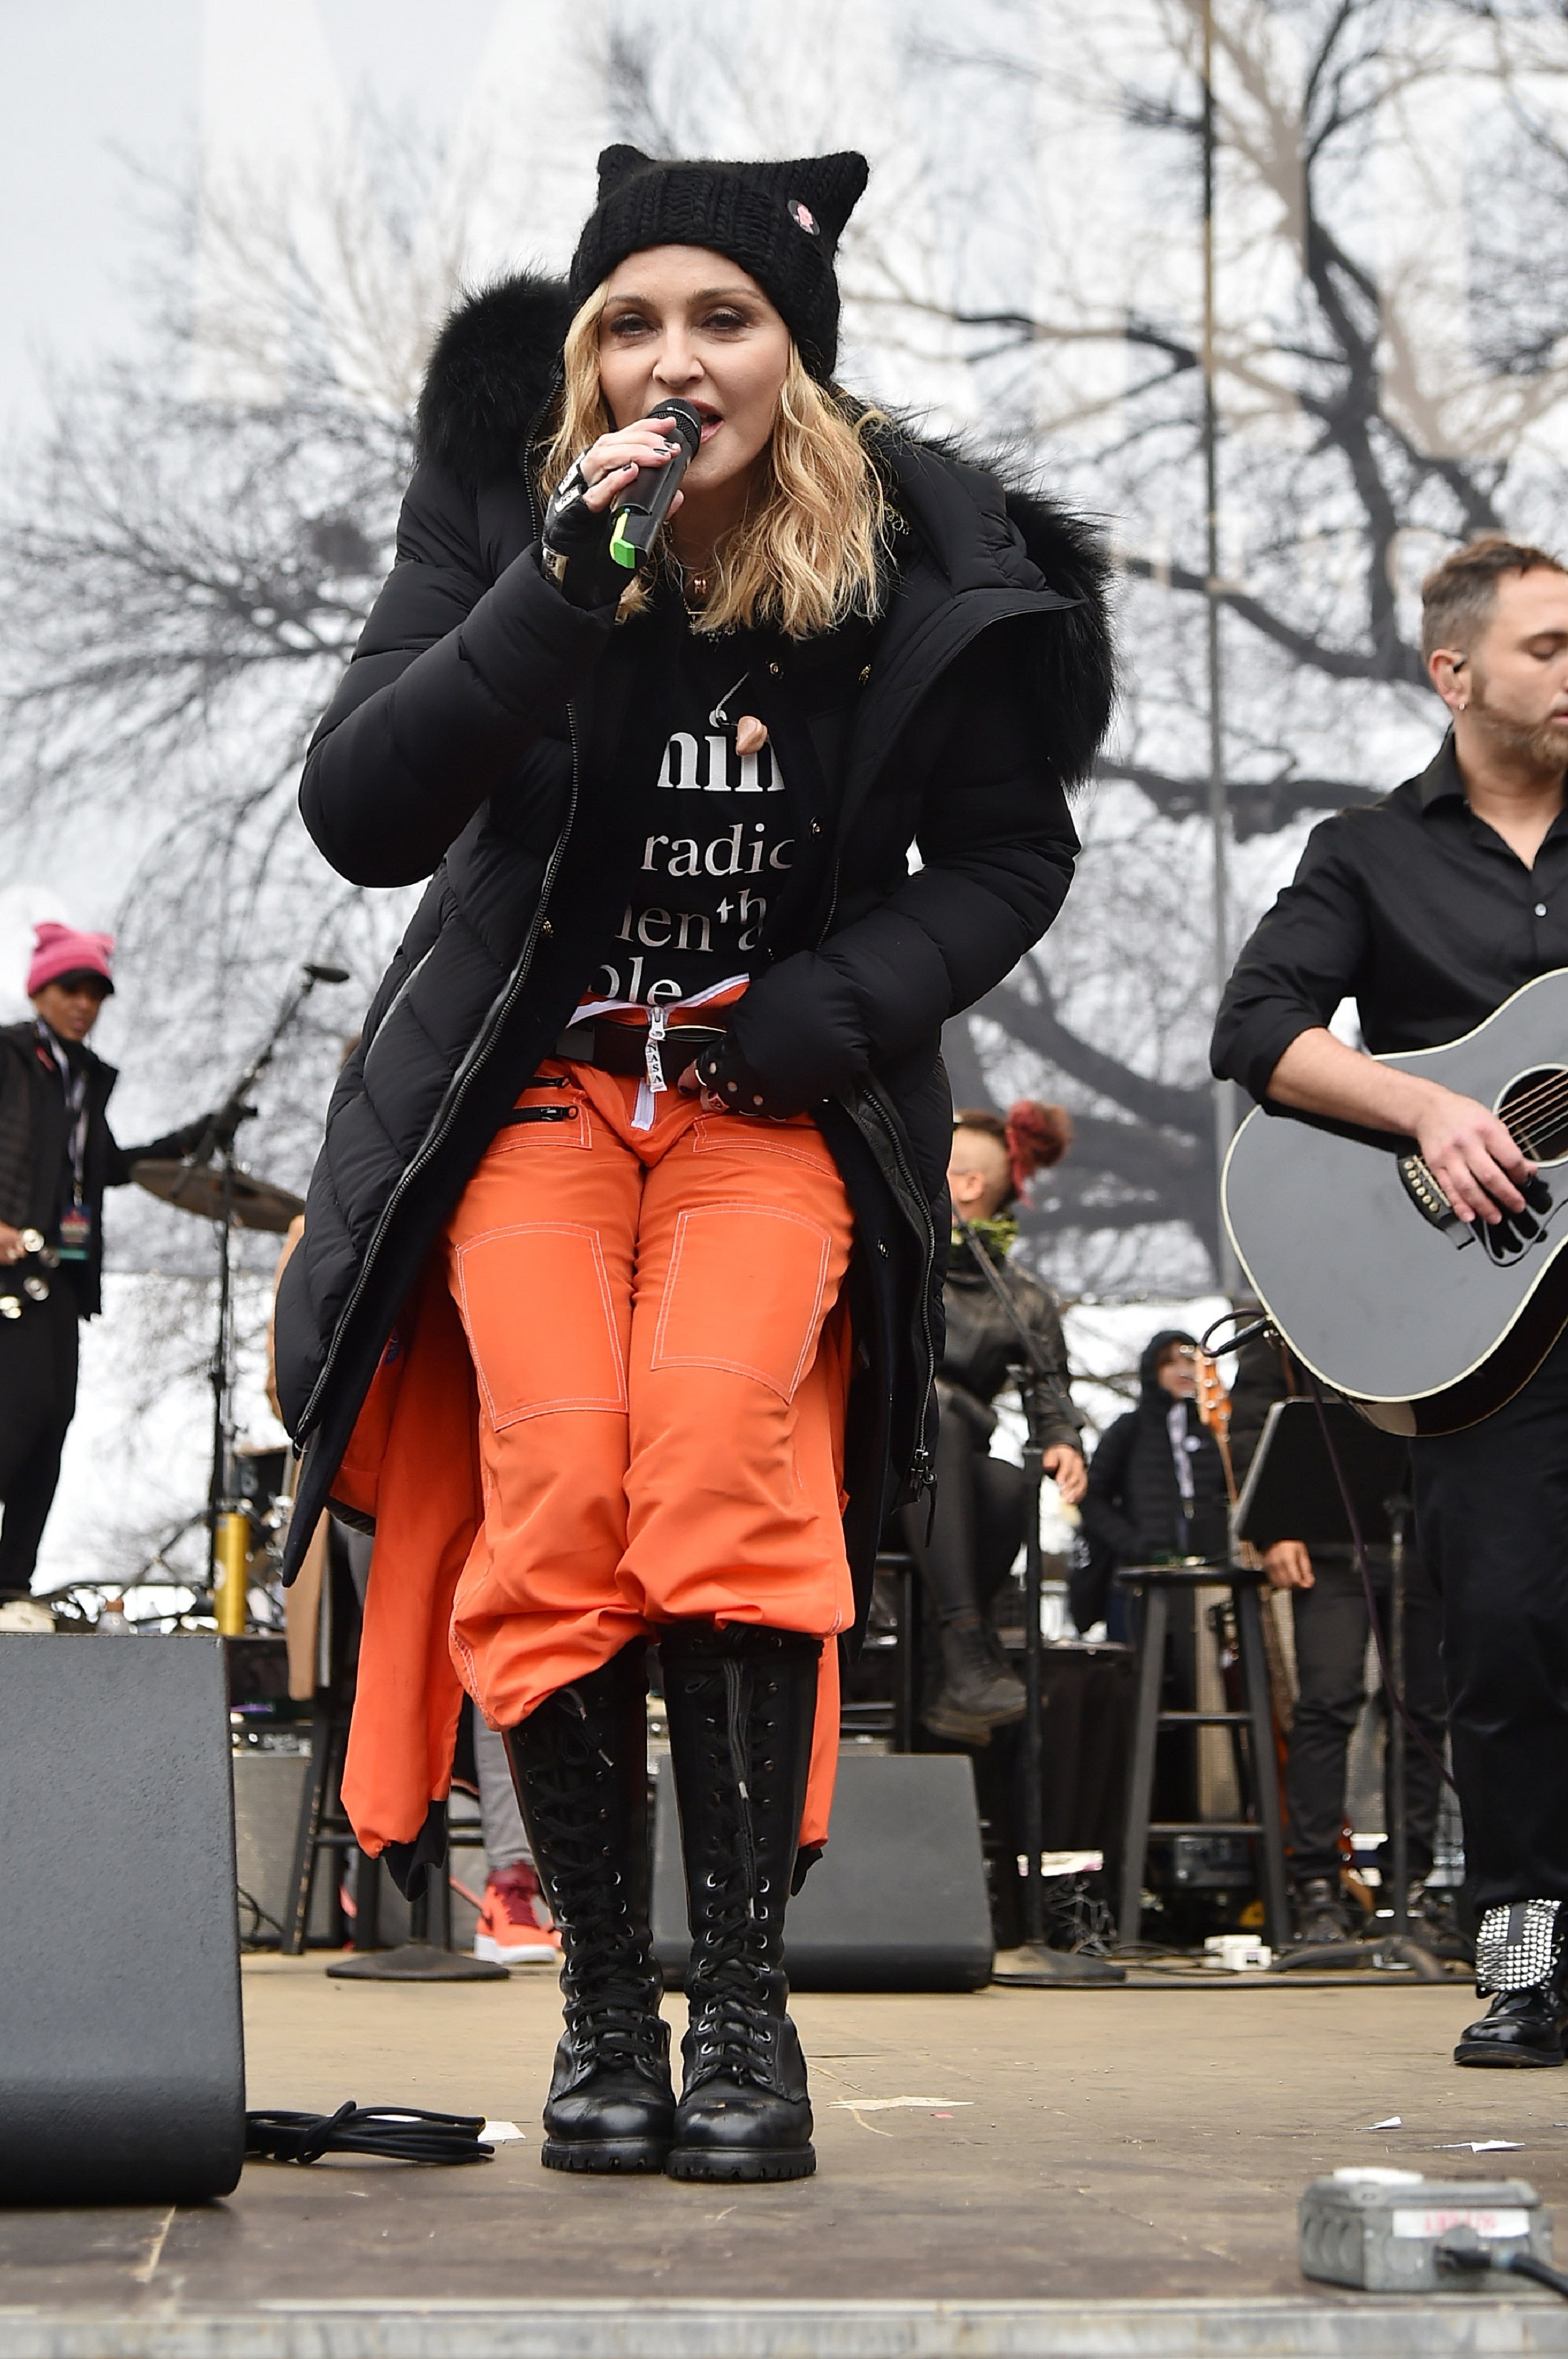 WASHINGTON, DC - JANUARY 21: Madonna performs onstage during the Women's March on Washington on January 21, 2017 in Washington, DC.   Theo Wargo/Getty Images/AFP